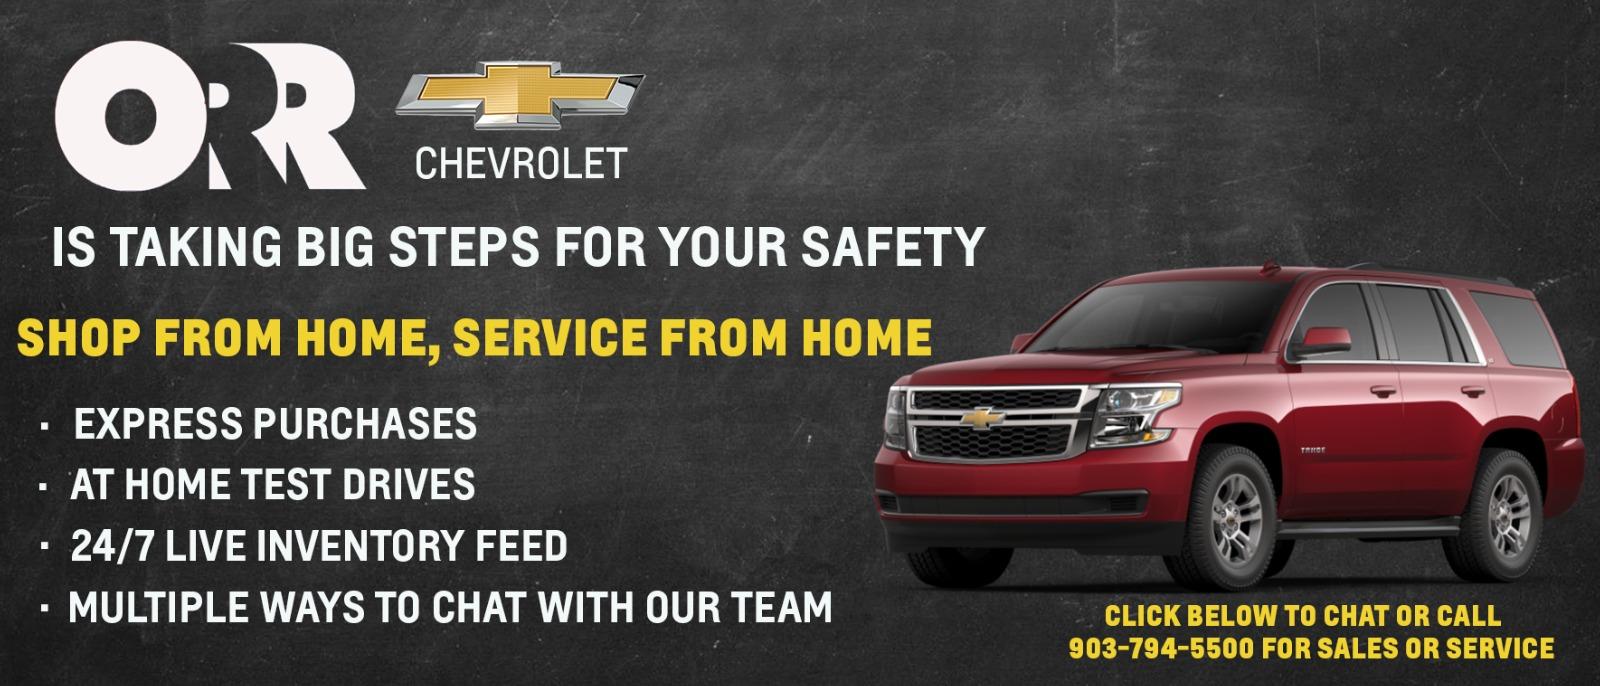 Orr Chevy Shop From Home - taking big steps for your safety